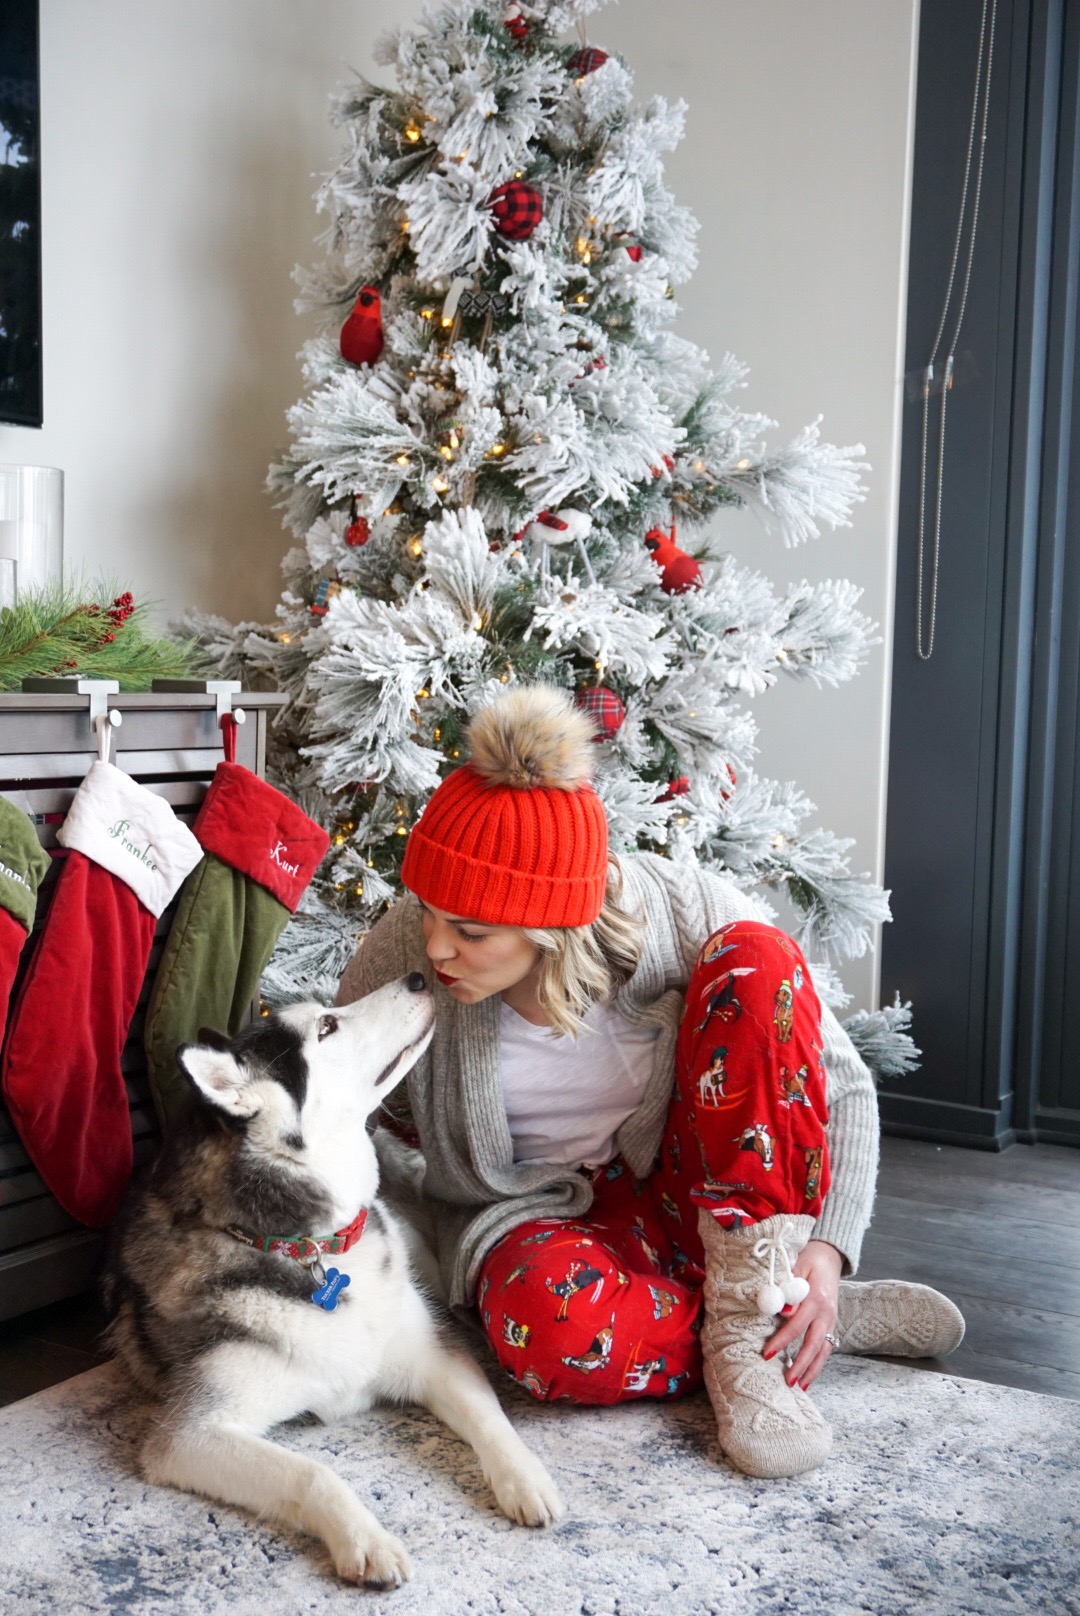 gift guide for the dog lover